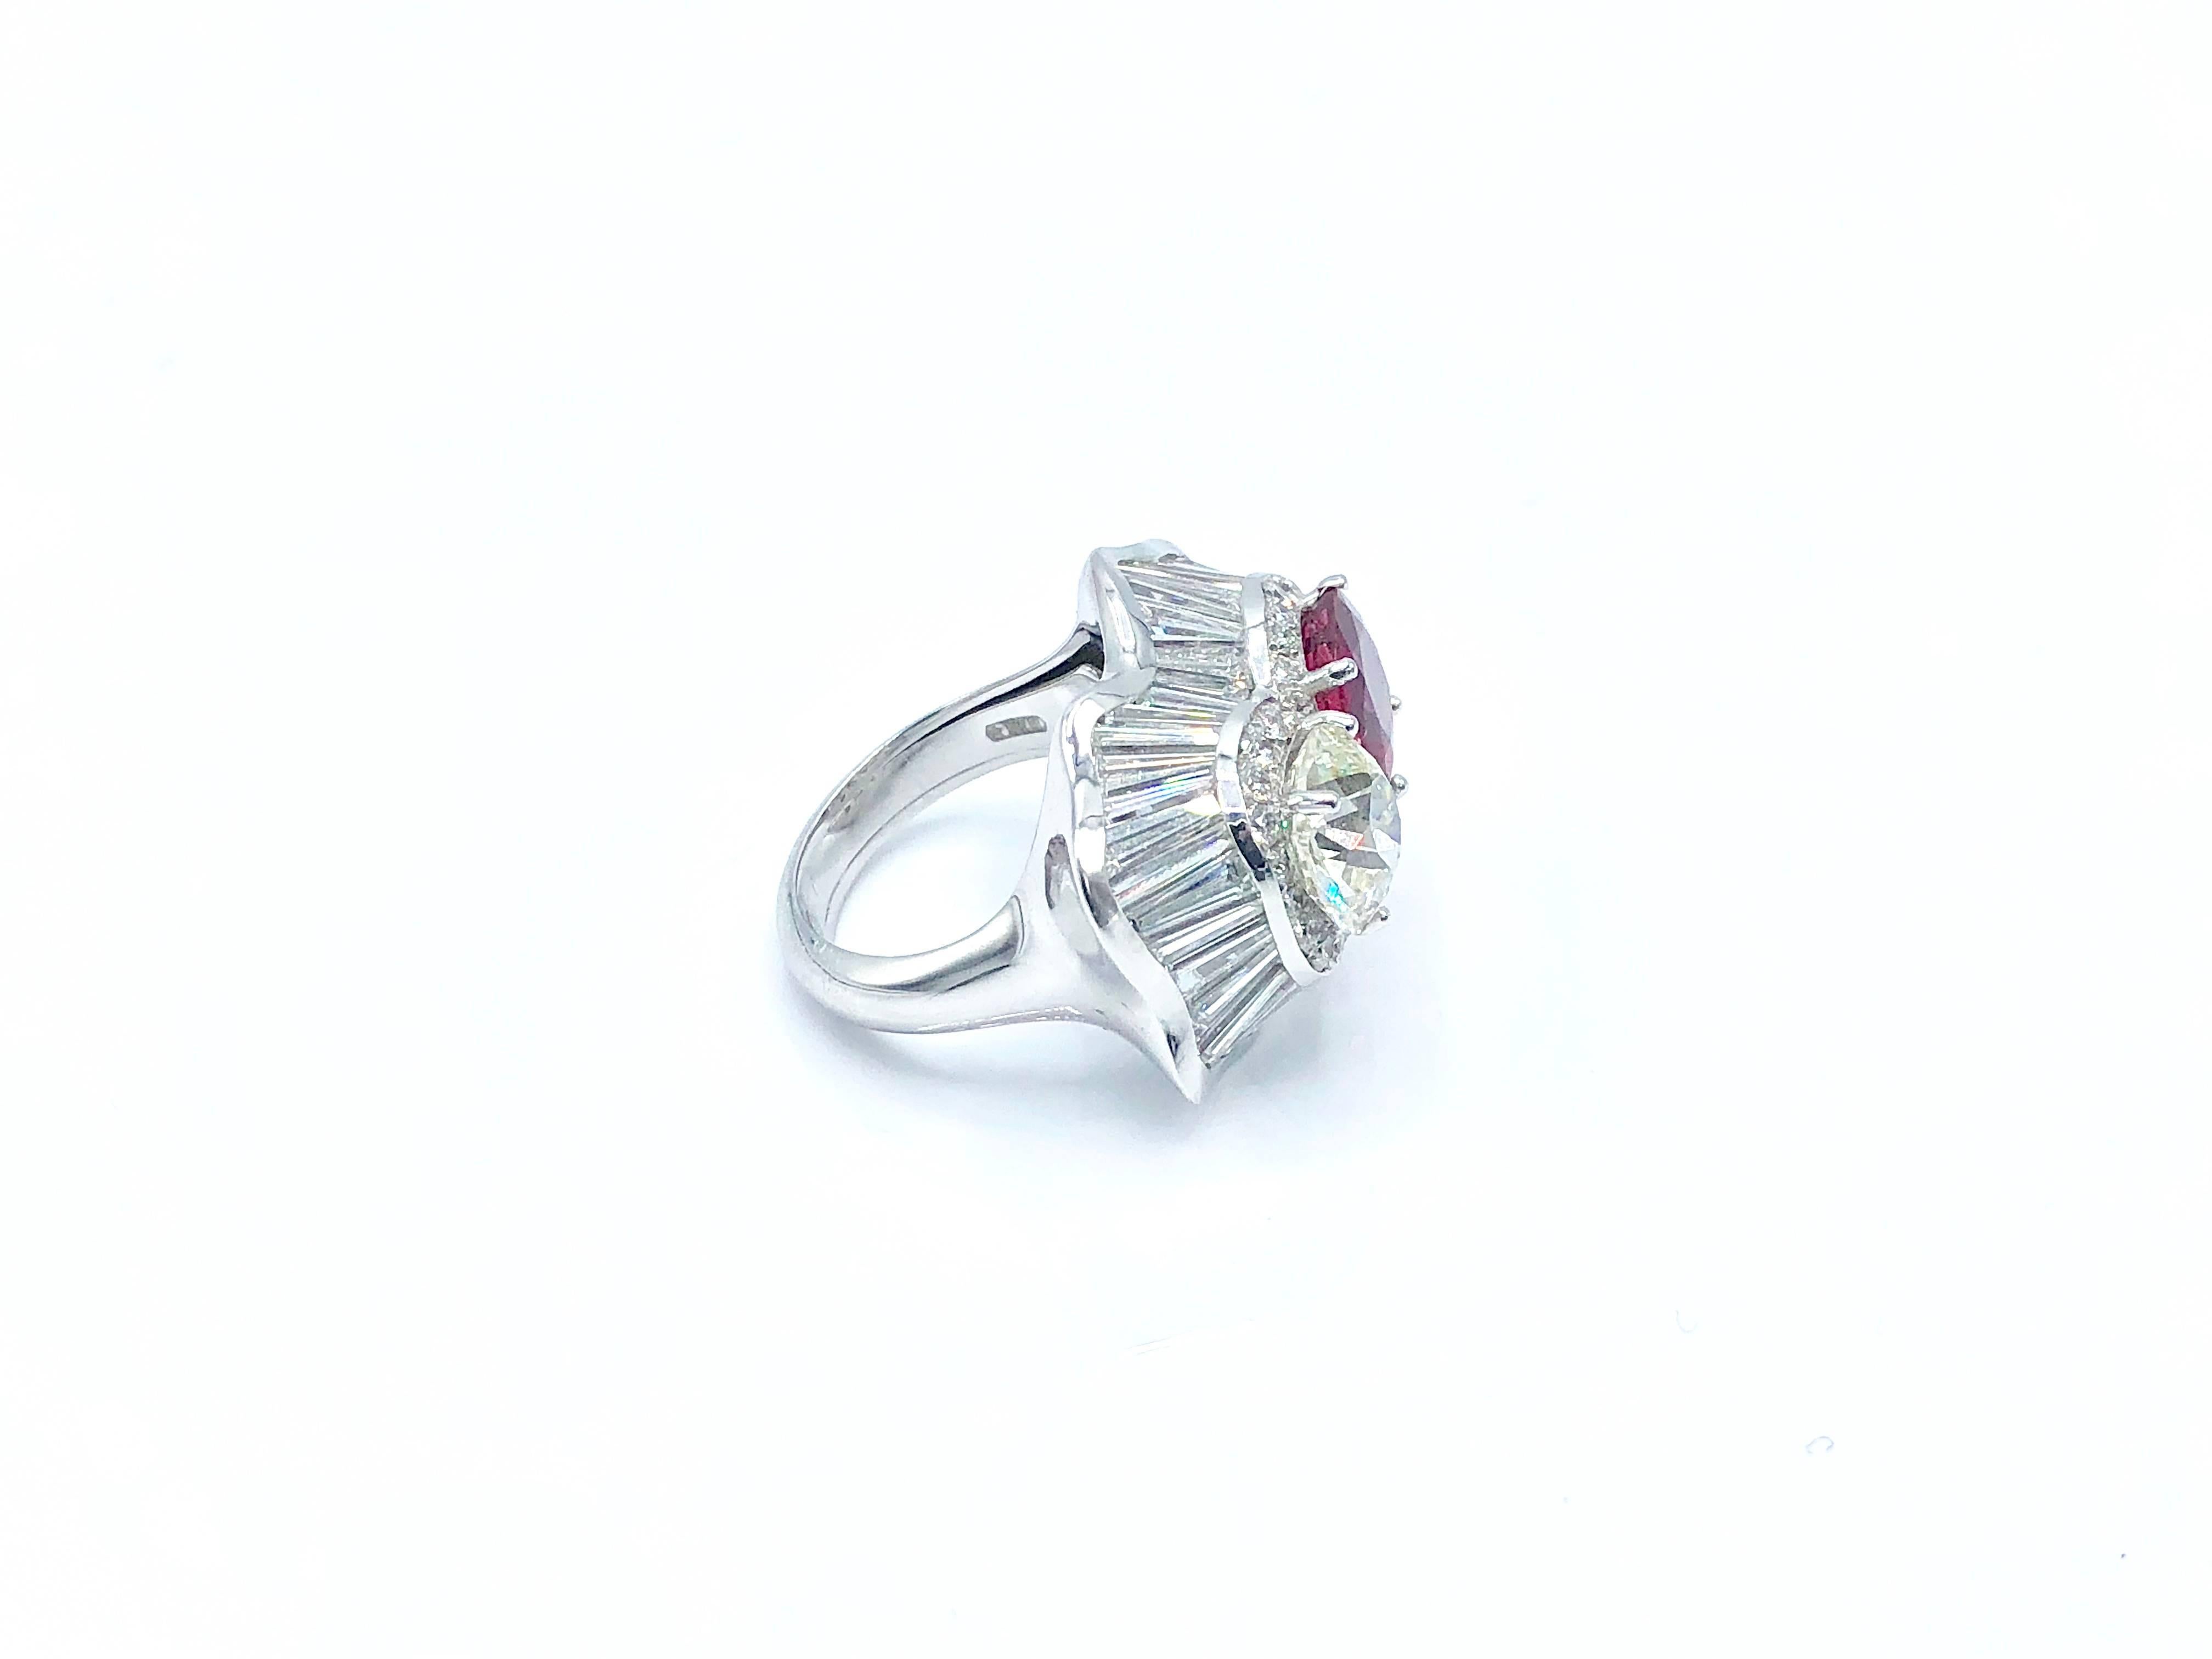 An exceptional cocktail twin ring featuring a stunning ruby and an old cushion cut 2,60 carat diamond surrounded by a contour of baguette cut diamonds for a total weight of 4,25 carats.

Ruby 3,02 - Cuchion Diamond 2,6 ct - Baguette Diamonds 4,25